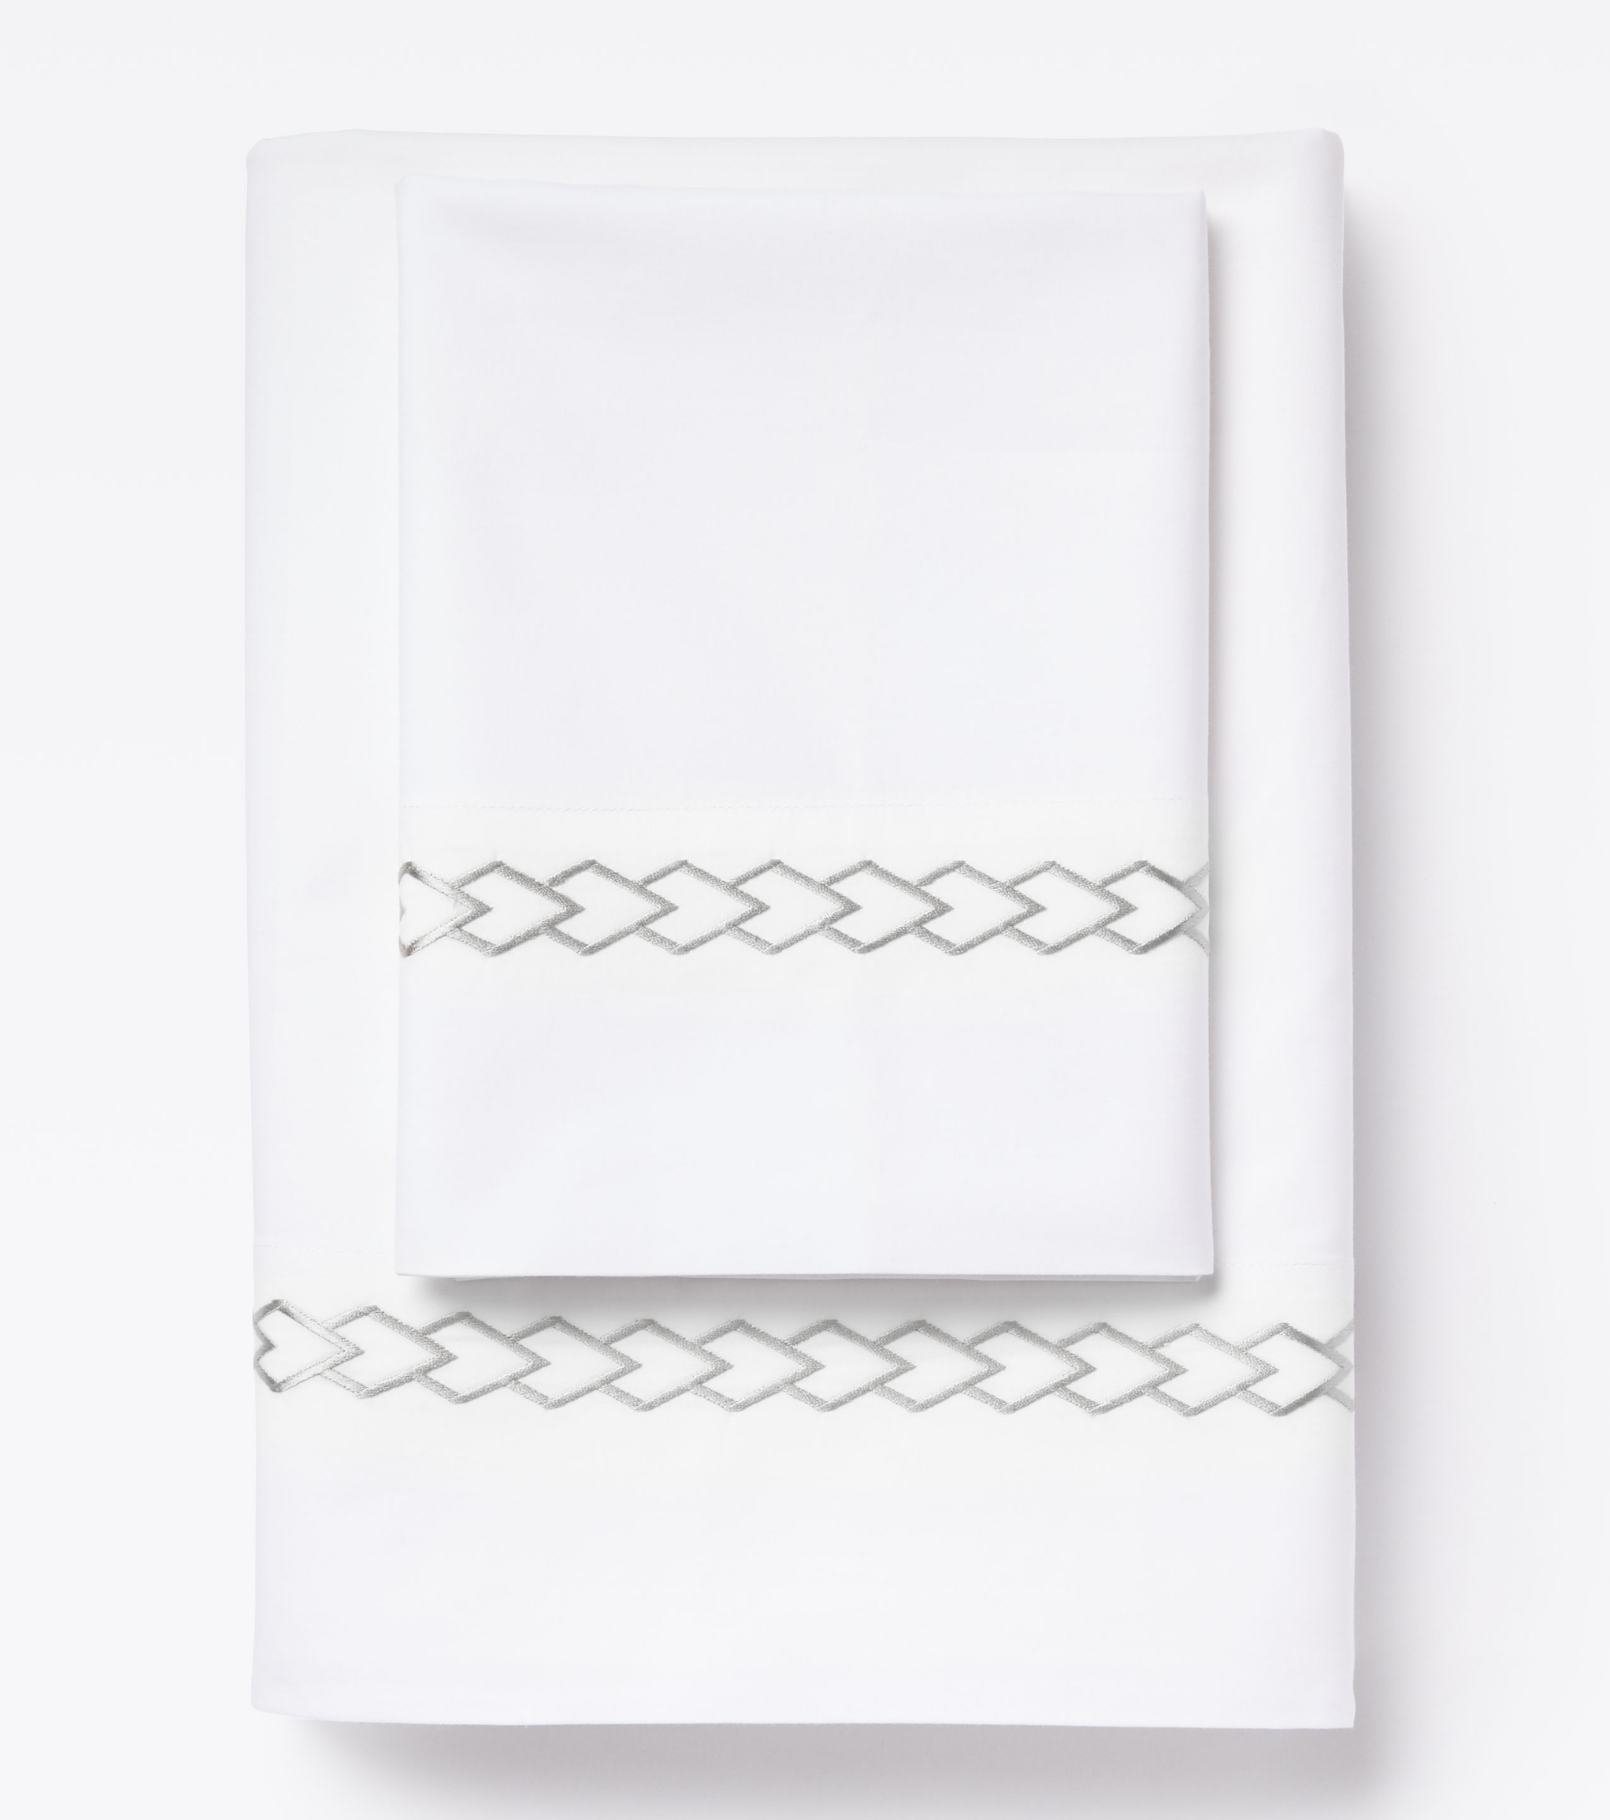 Averylily Waterfall Sheet Set in White with embroidered details in Stone. 510-thread cotton pure cotton percale.